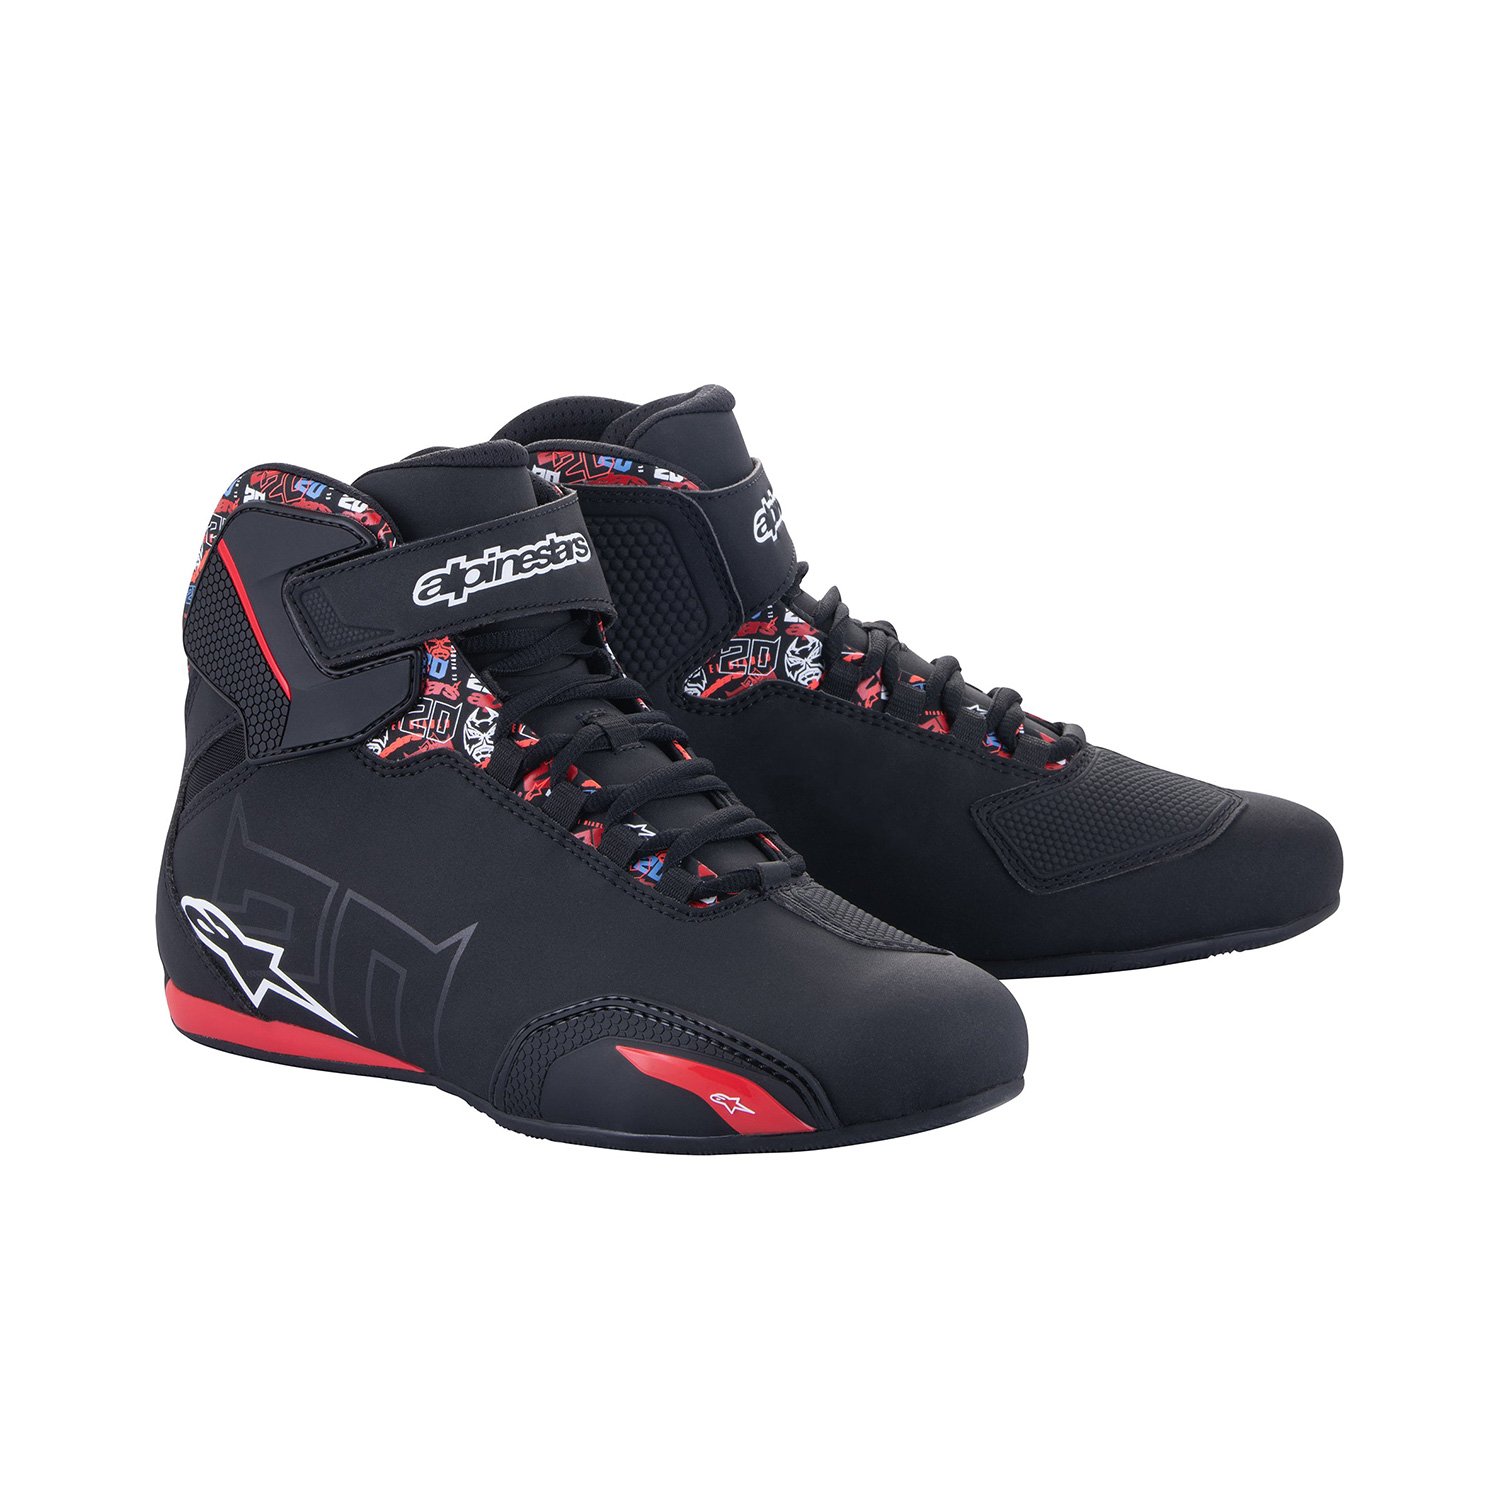 Image of Alpinestars FQ20 Sektor Noir Bright Rouge Chaussures Taille US 6